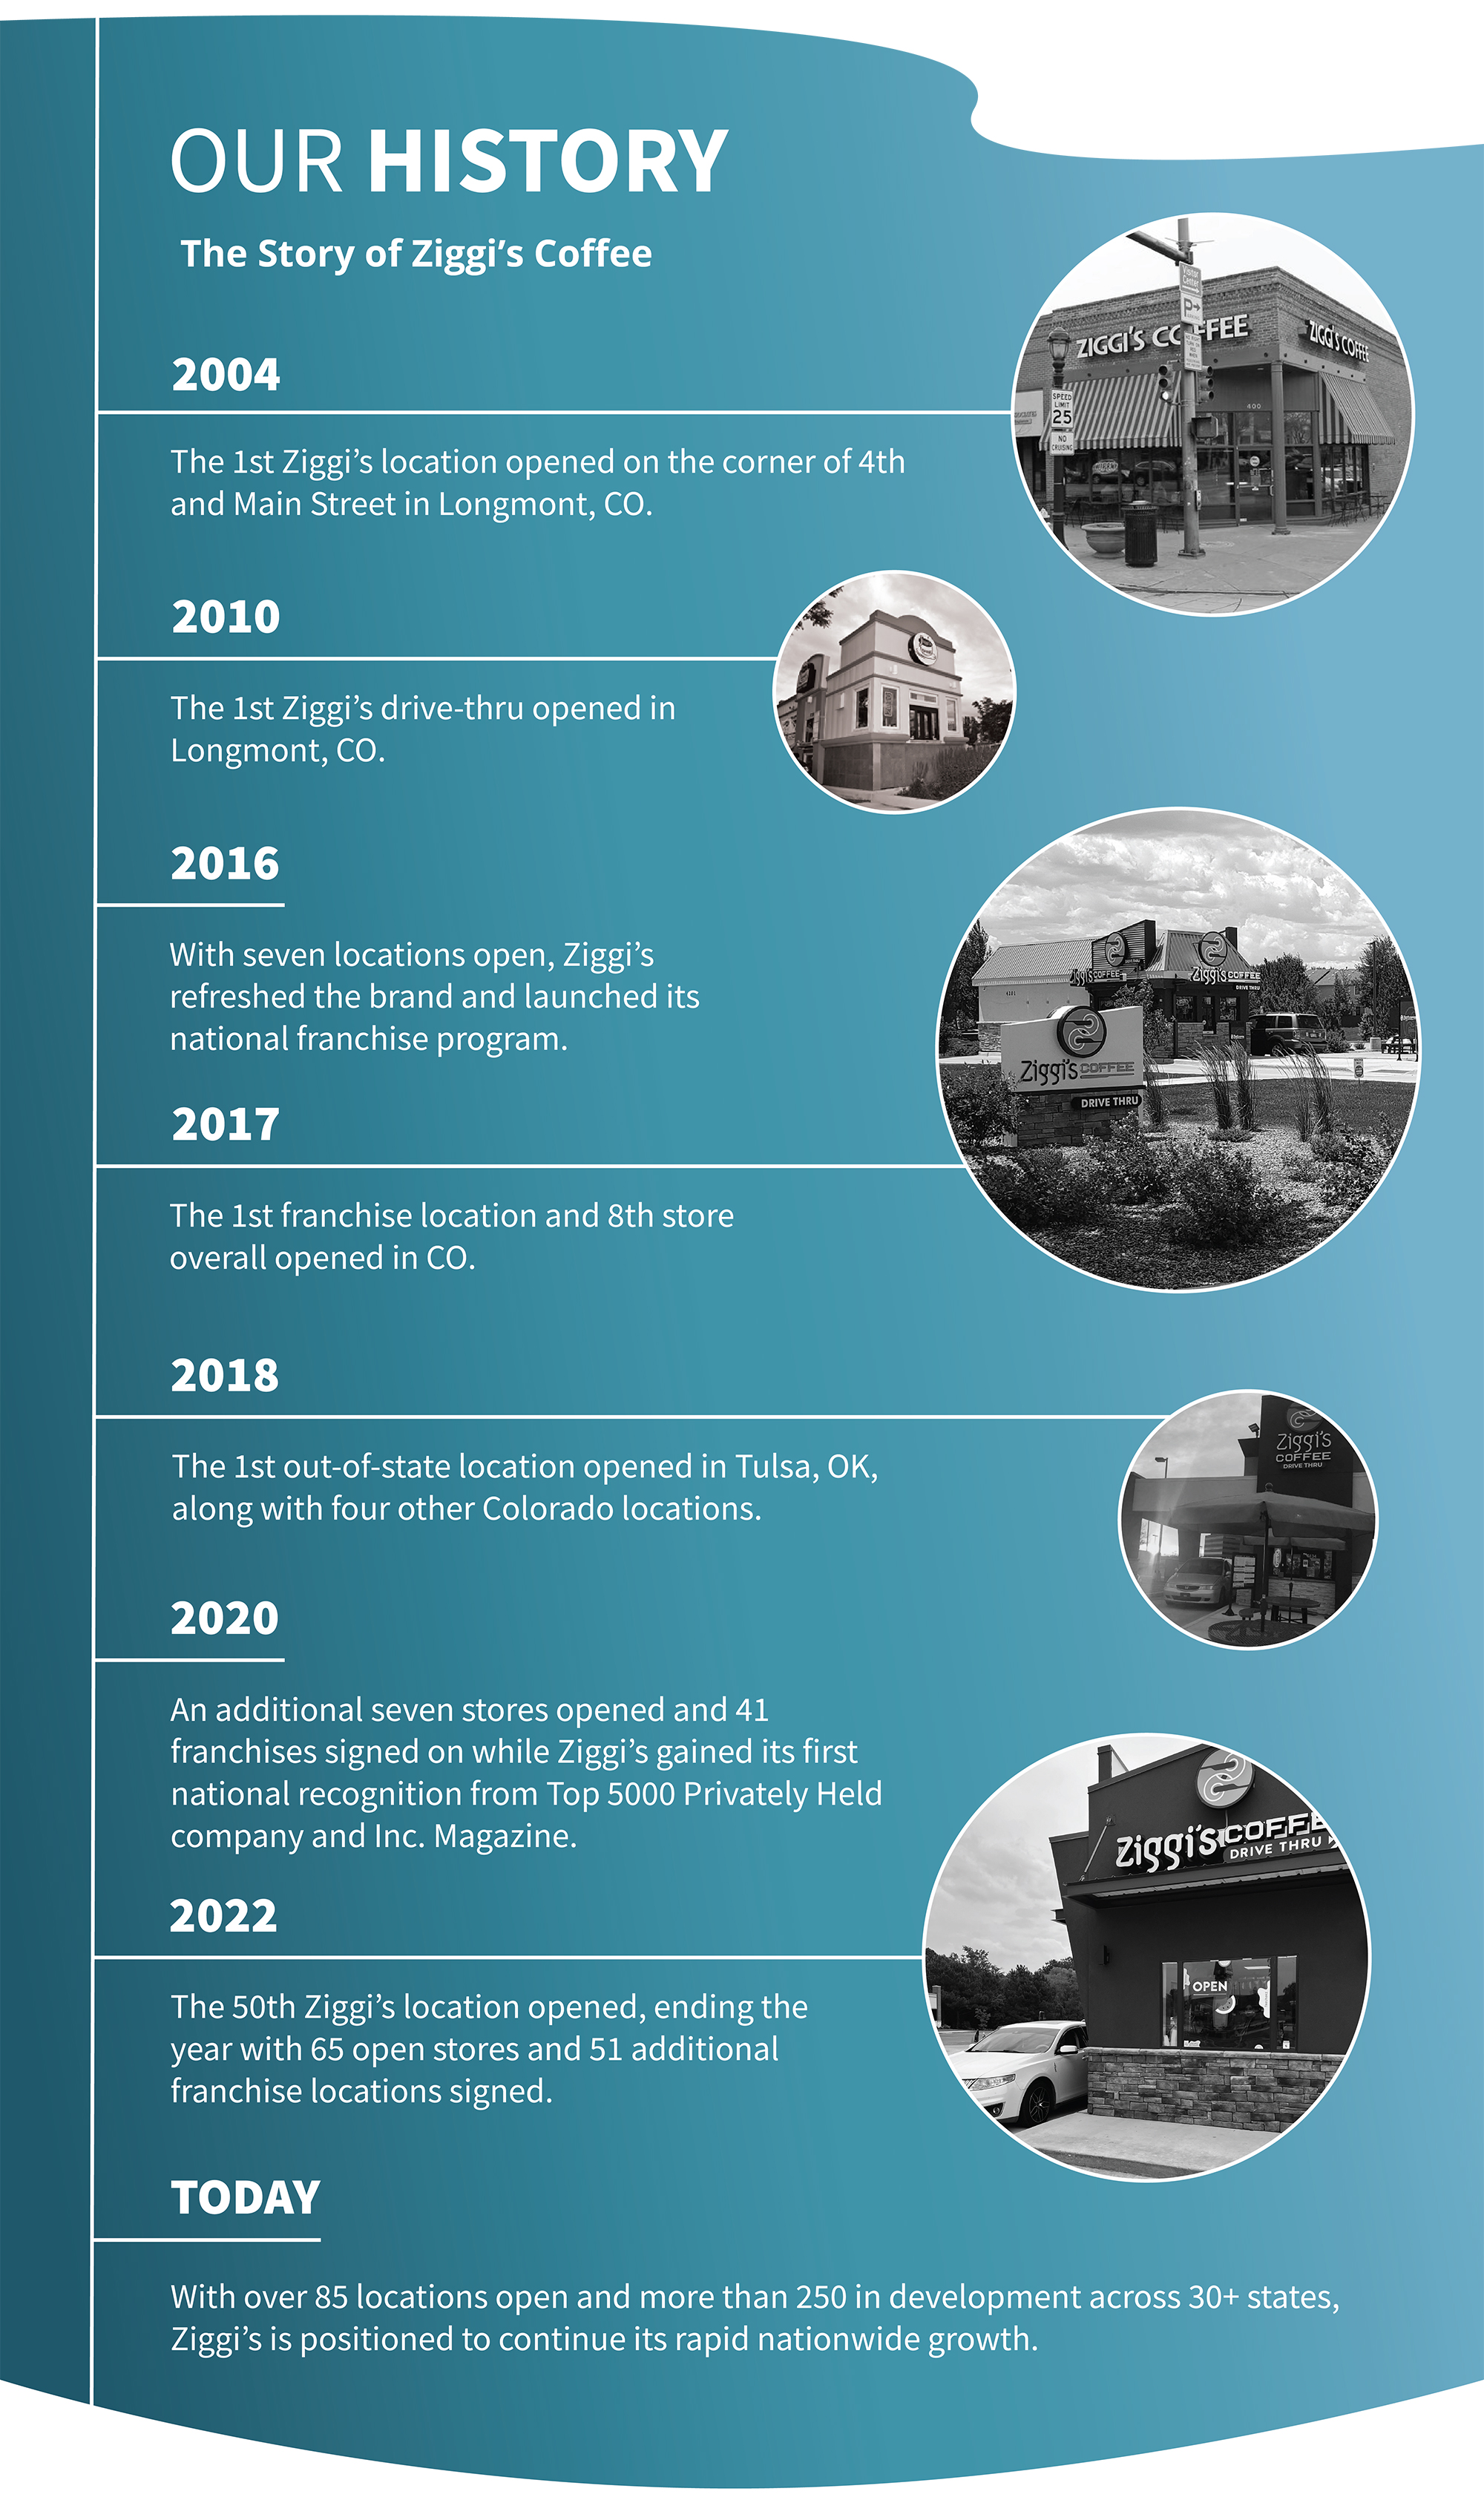 image: a full Ziggis Coffee history breakdown including 2004-the first Ziggi’s location opened on the corner of fourth and Main Street in Longmont, CO; 2010-the first Ziggis drive-thru opened in Longmont, CO; 2016-with seven locations open, Ziggi’s refreshed the brand and launched its national franchise program; 2017-the first franchise location and eighth store overall opened in CO; 2018-the first out-of-state location opened in Tulsa, OK, along with four other Colorado locations; 2020-an additional seven stores opened and forty-one franchises signed on while Ziggi’s gained its first national recognition from Top 5000 Privately Held company and Inc. Magazine; 2022-the 50th Ziggi’s location opened, ending the year with 65 open stores and 51 additional franchise locations signed; and today-with over 85 locations open and more than 250 in development across 30+ states,
Ziggi’s is positioned to continue its rapid nationwide growth.